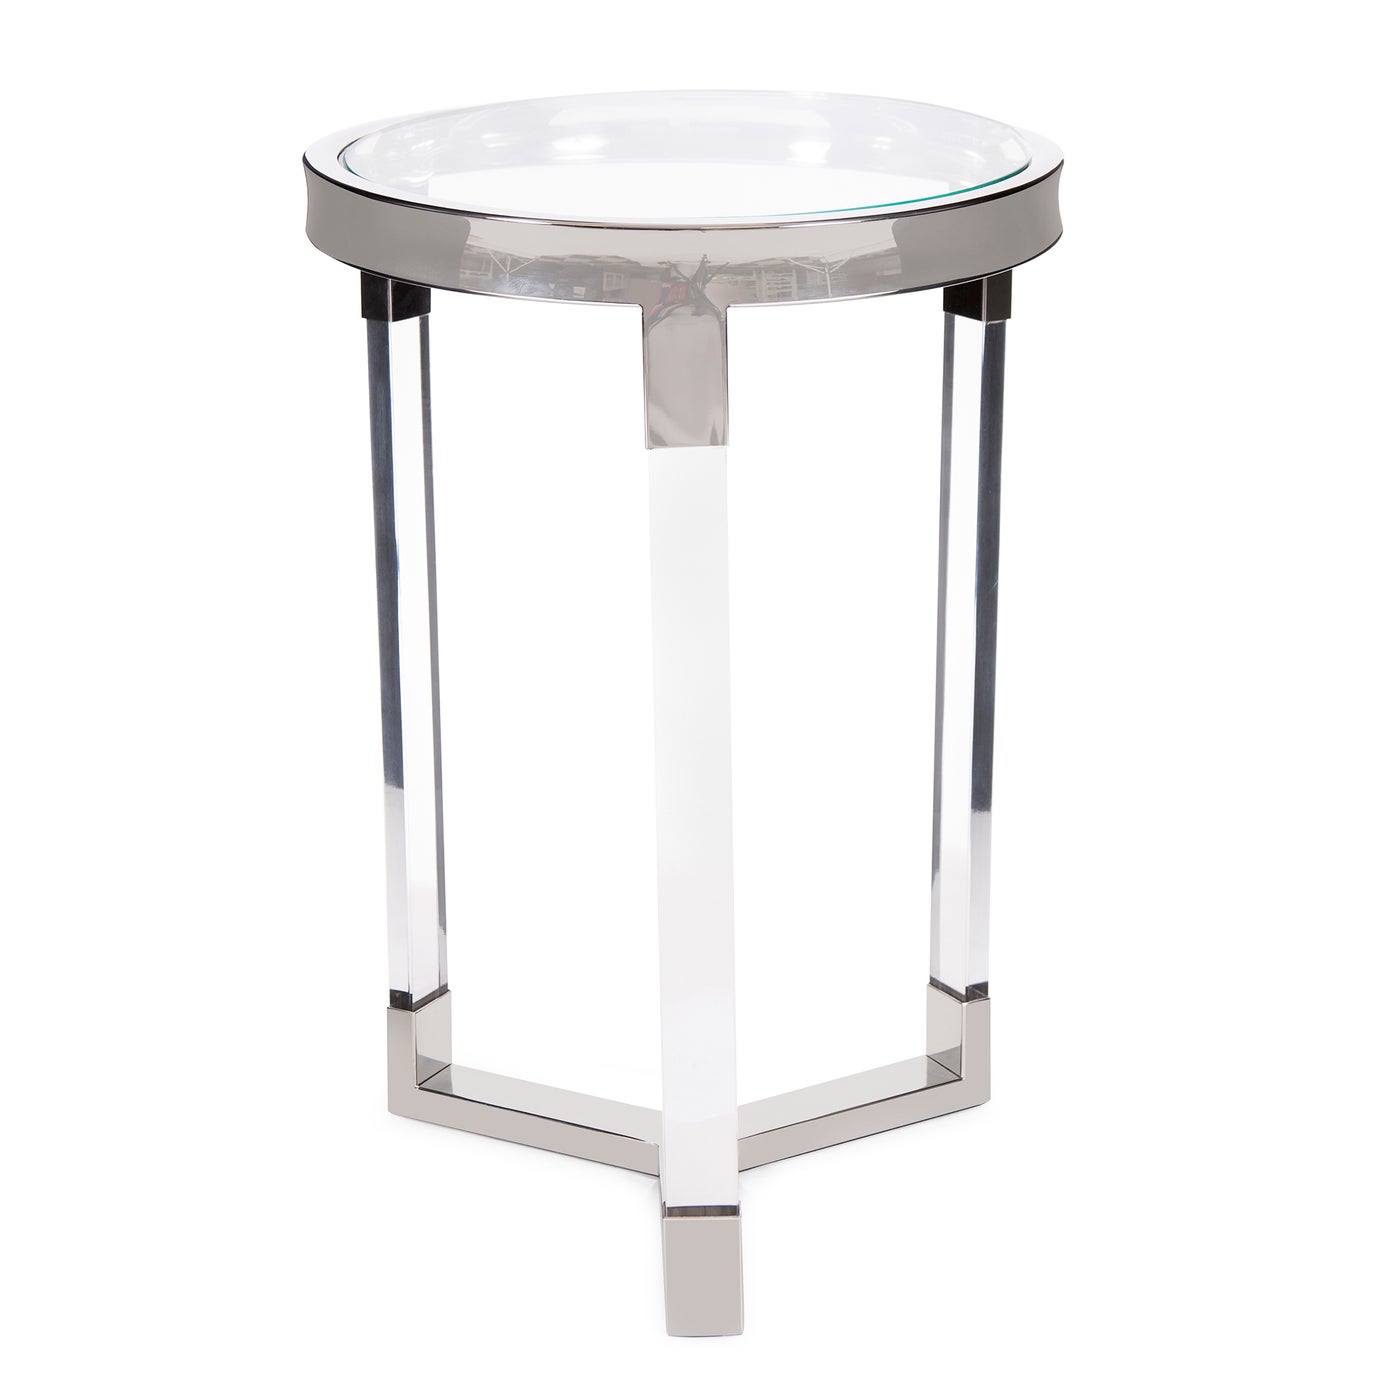 Acrylic & Stainless Steel Round Side Table